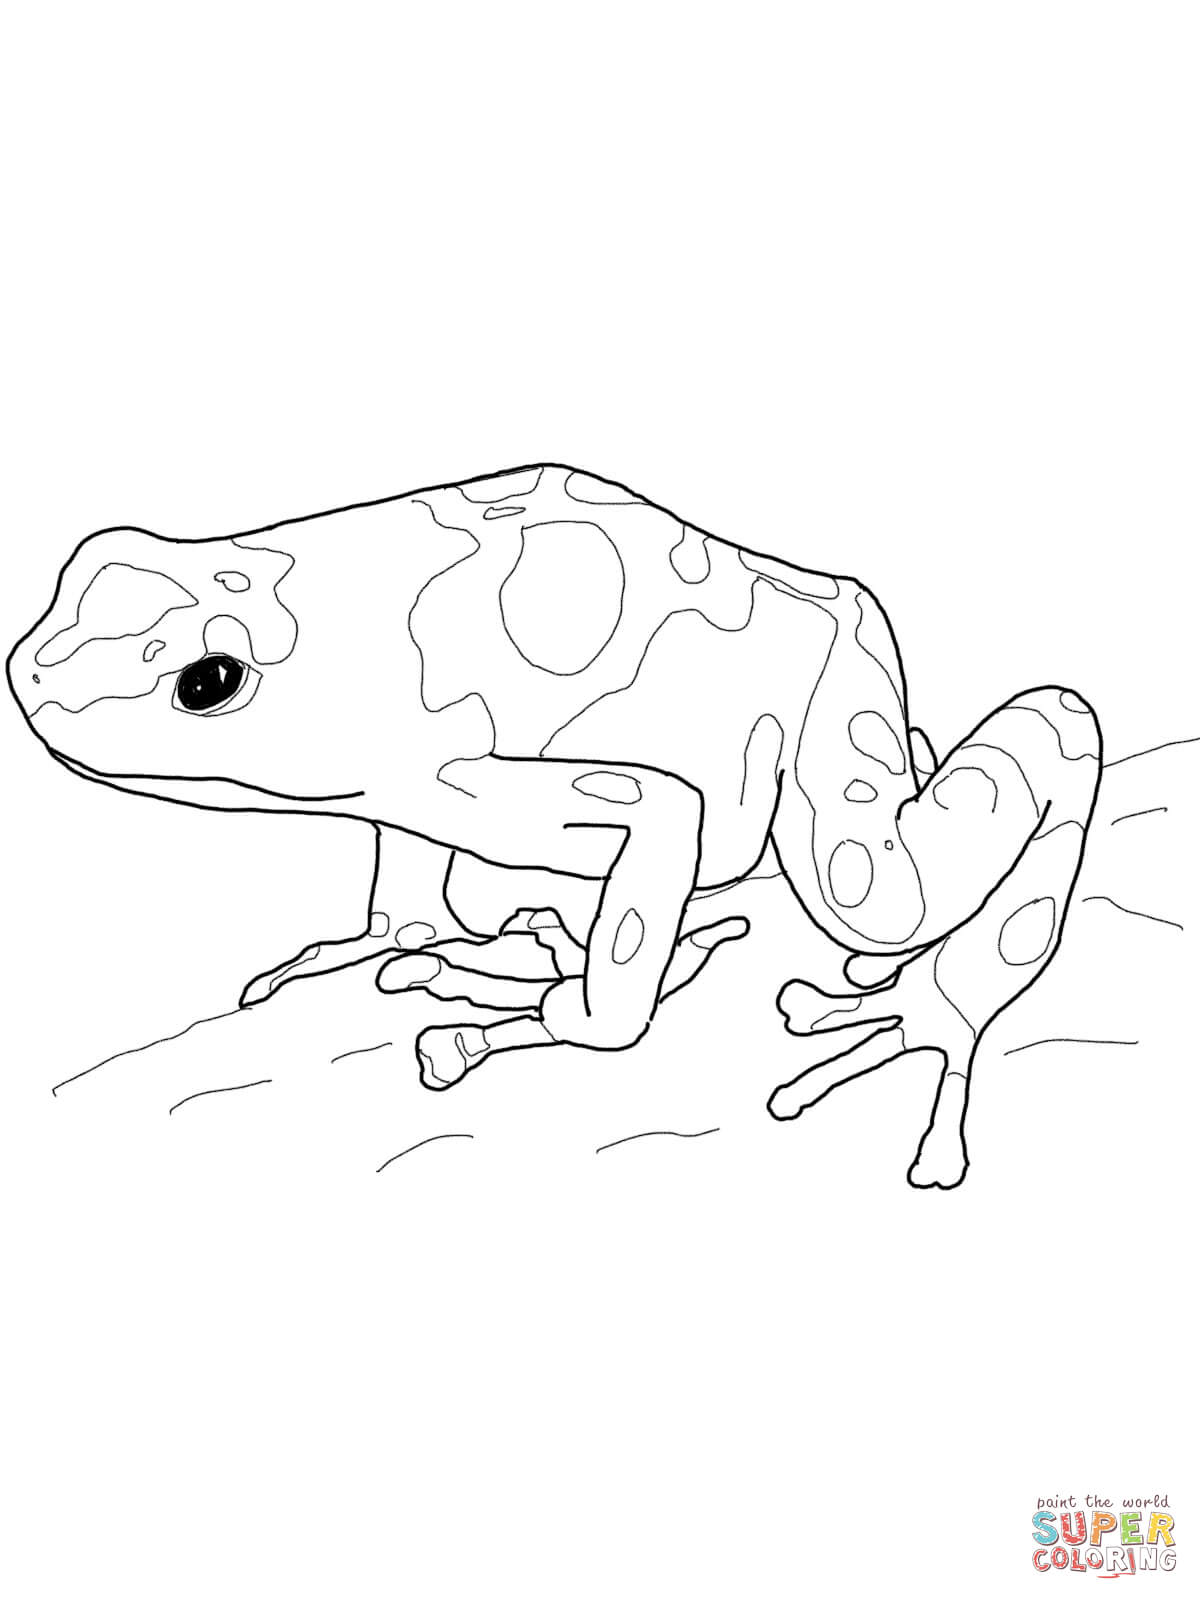 Blue Poison Dart Frog coloring #15, Download drawings